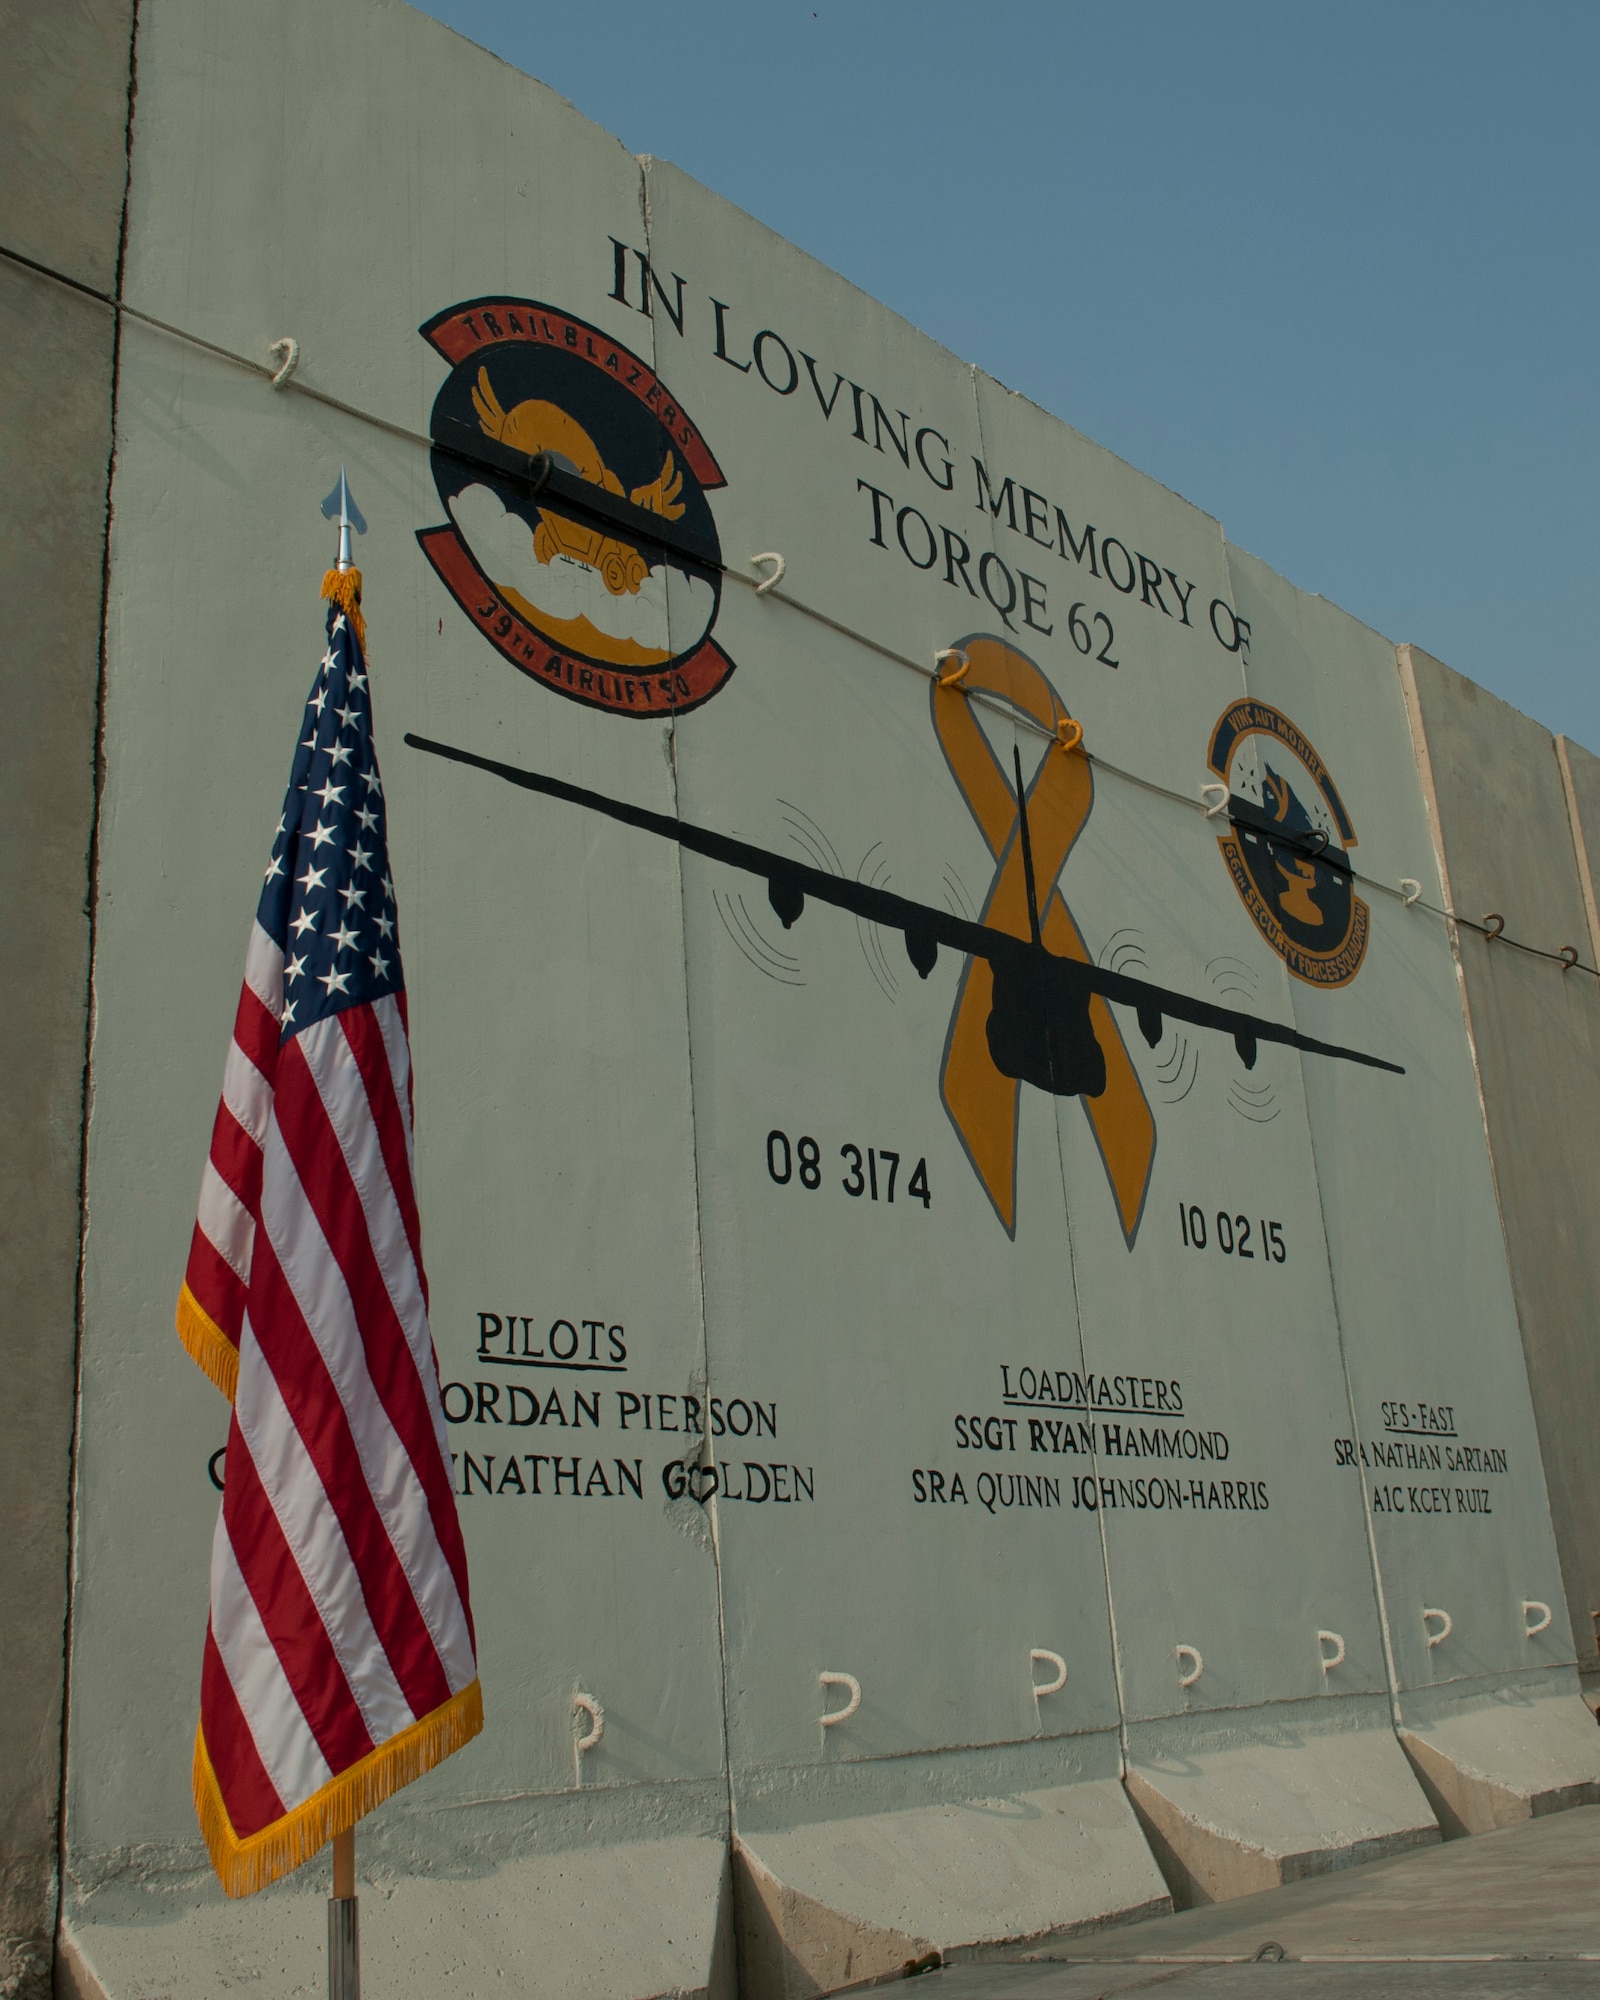 A mural on the flightline honors those Airmen who lost their lives when TORQE 62 crashed one year ago, Bagram Airfield, Afghanistan, Oct. 2, 2016. A ceremony was held to honor and remember Capt. Jordan Pierson, Capt. Jonathan Golden, Staff Sgt. Ryan Hammond, Senior Airman Quinn Johnson-Harris, Senior Airman Nathan Sartain, and Airman 1st Class Kcey Ruiz who were lost on Oct. 2, 2015. (U.S. Air Force photo by Capt. Korey Fratini)